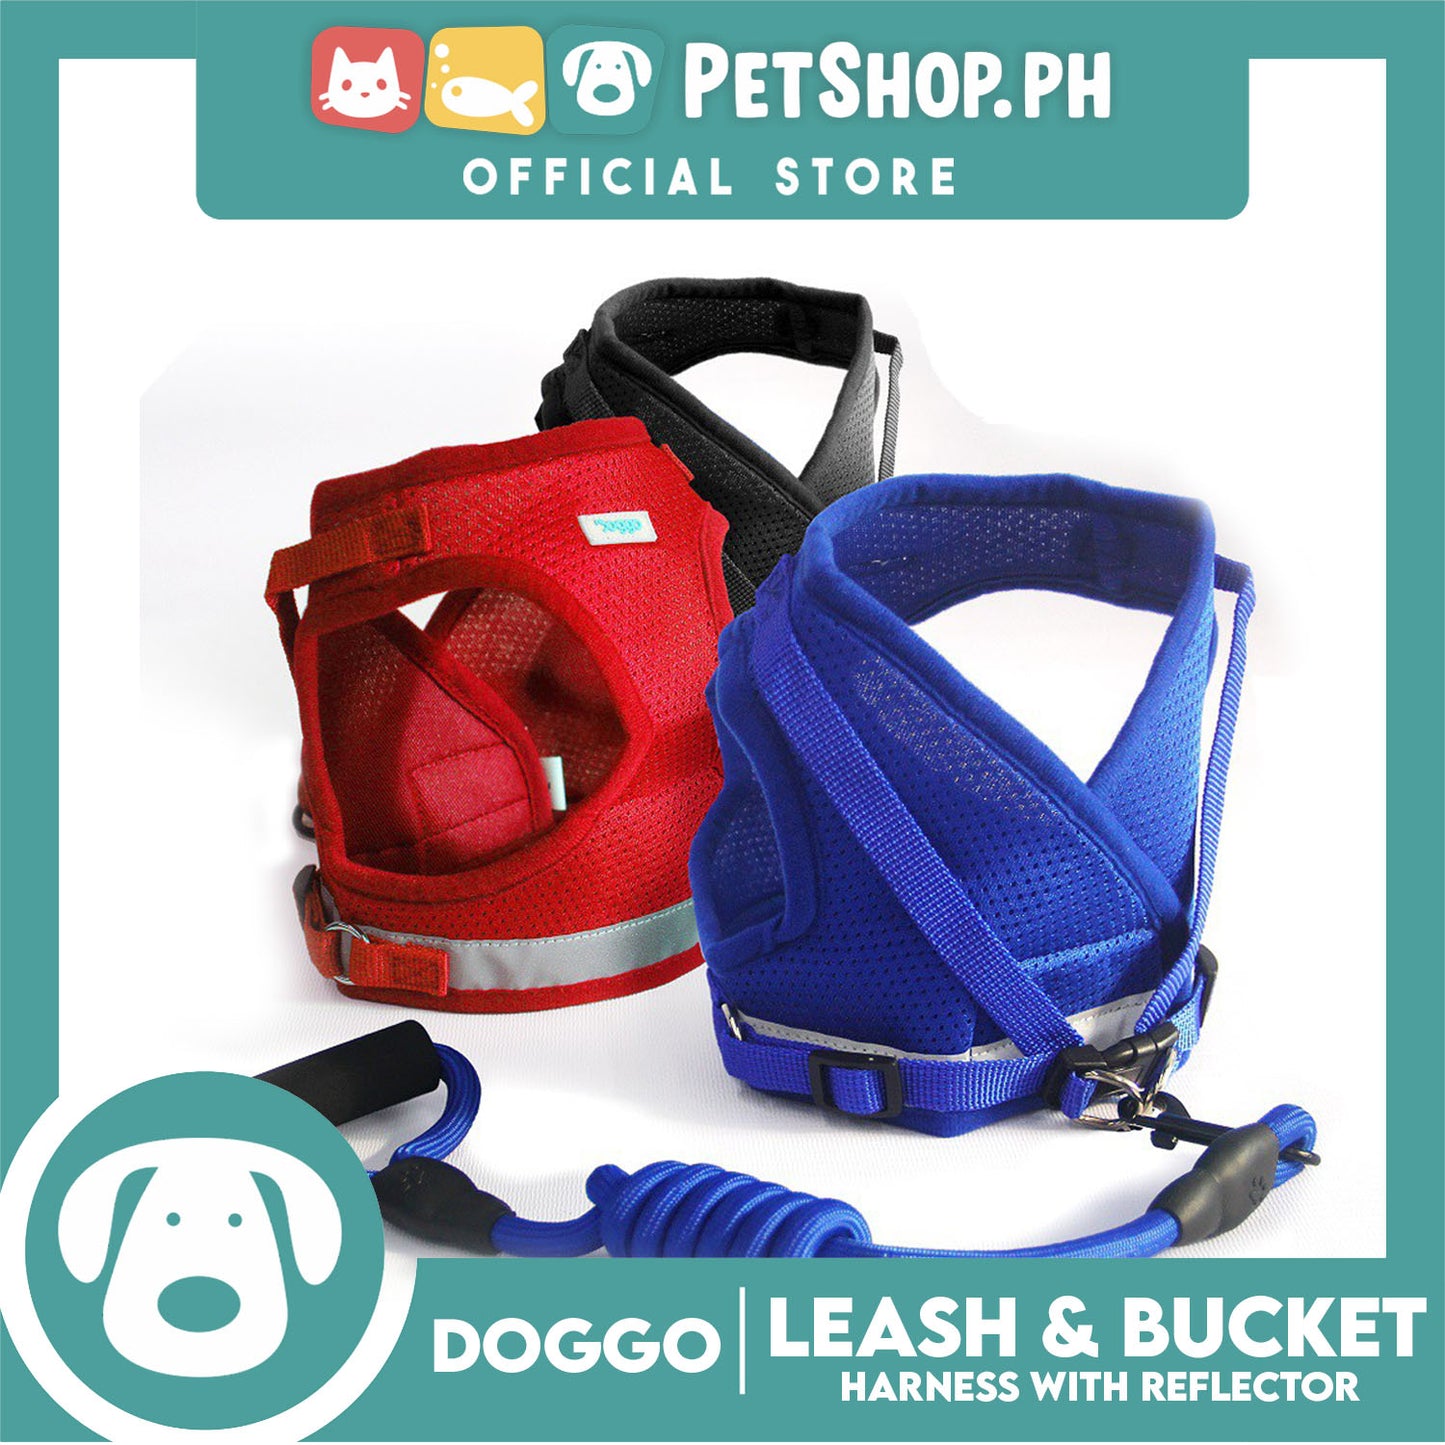 Doggo Leash and Bucket Harness with Reflector Extra Small (Red) Perfect Set for Your Dog